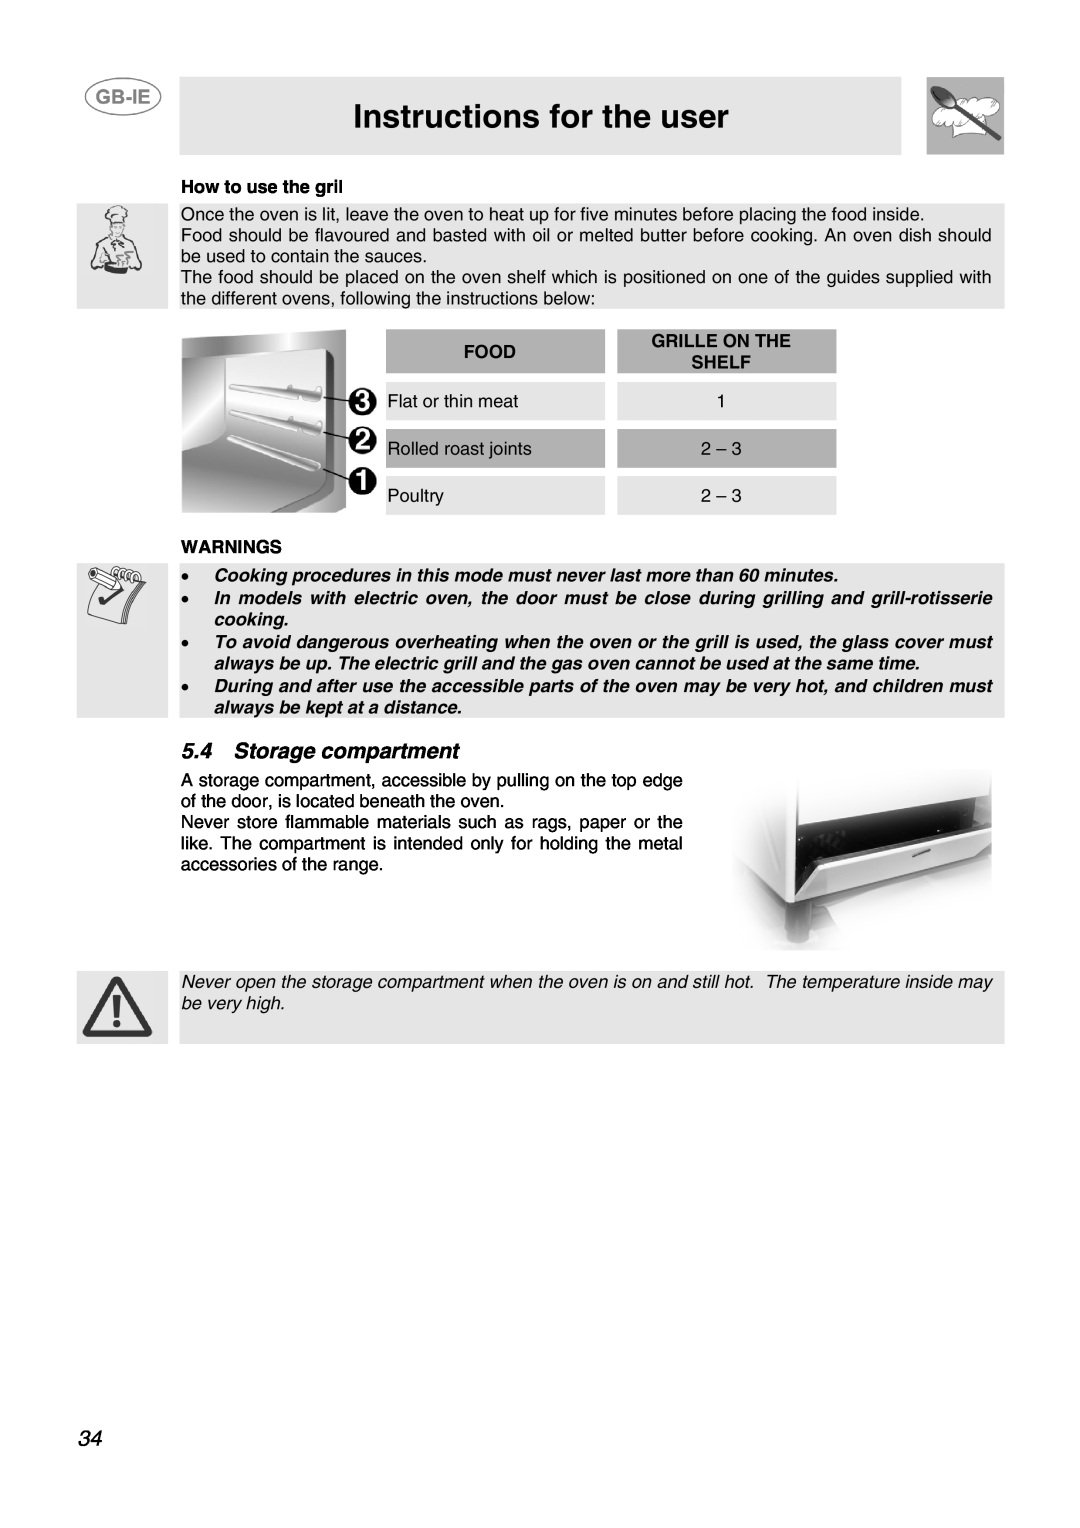 Smeg SID61MFX5 Storage compartment, Instructions for the user, How to use the gril, Food, Grille On The, Shelf, Warnings 